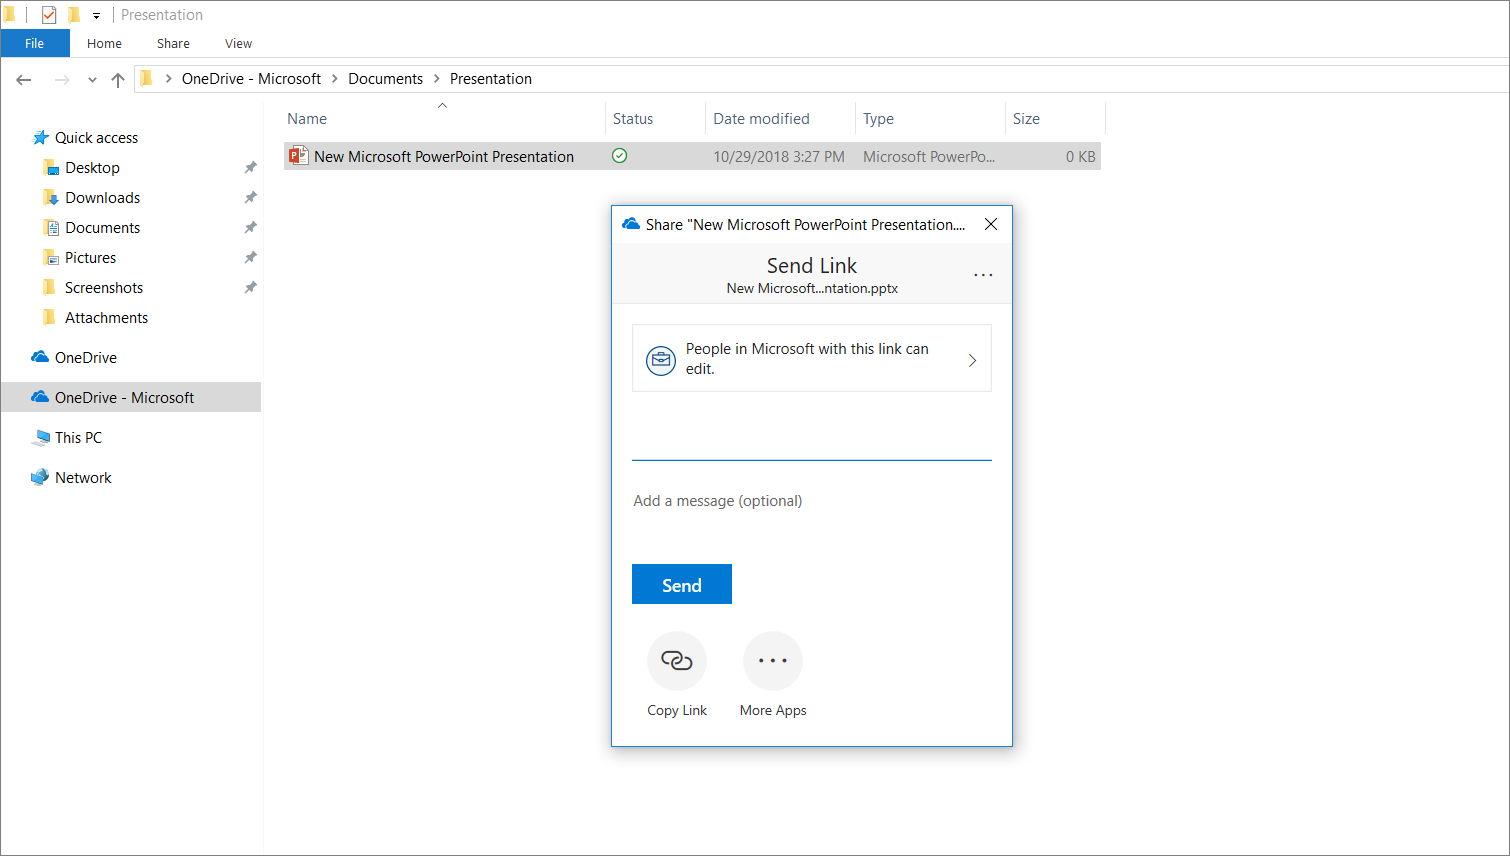 how much do you charge for download file from onedrive cloud storage